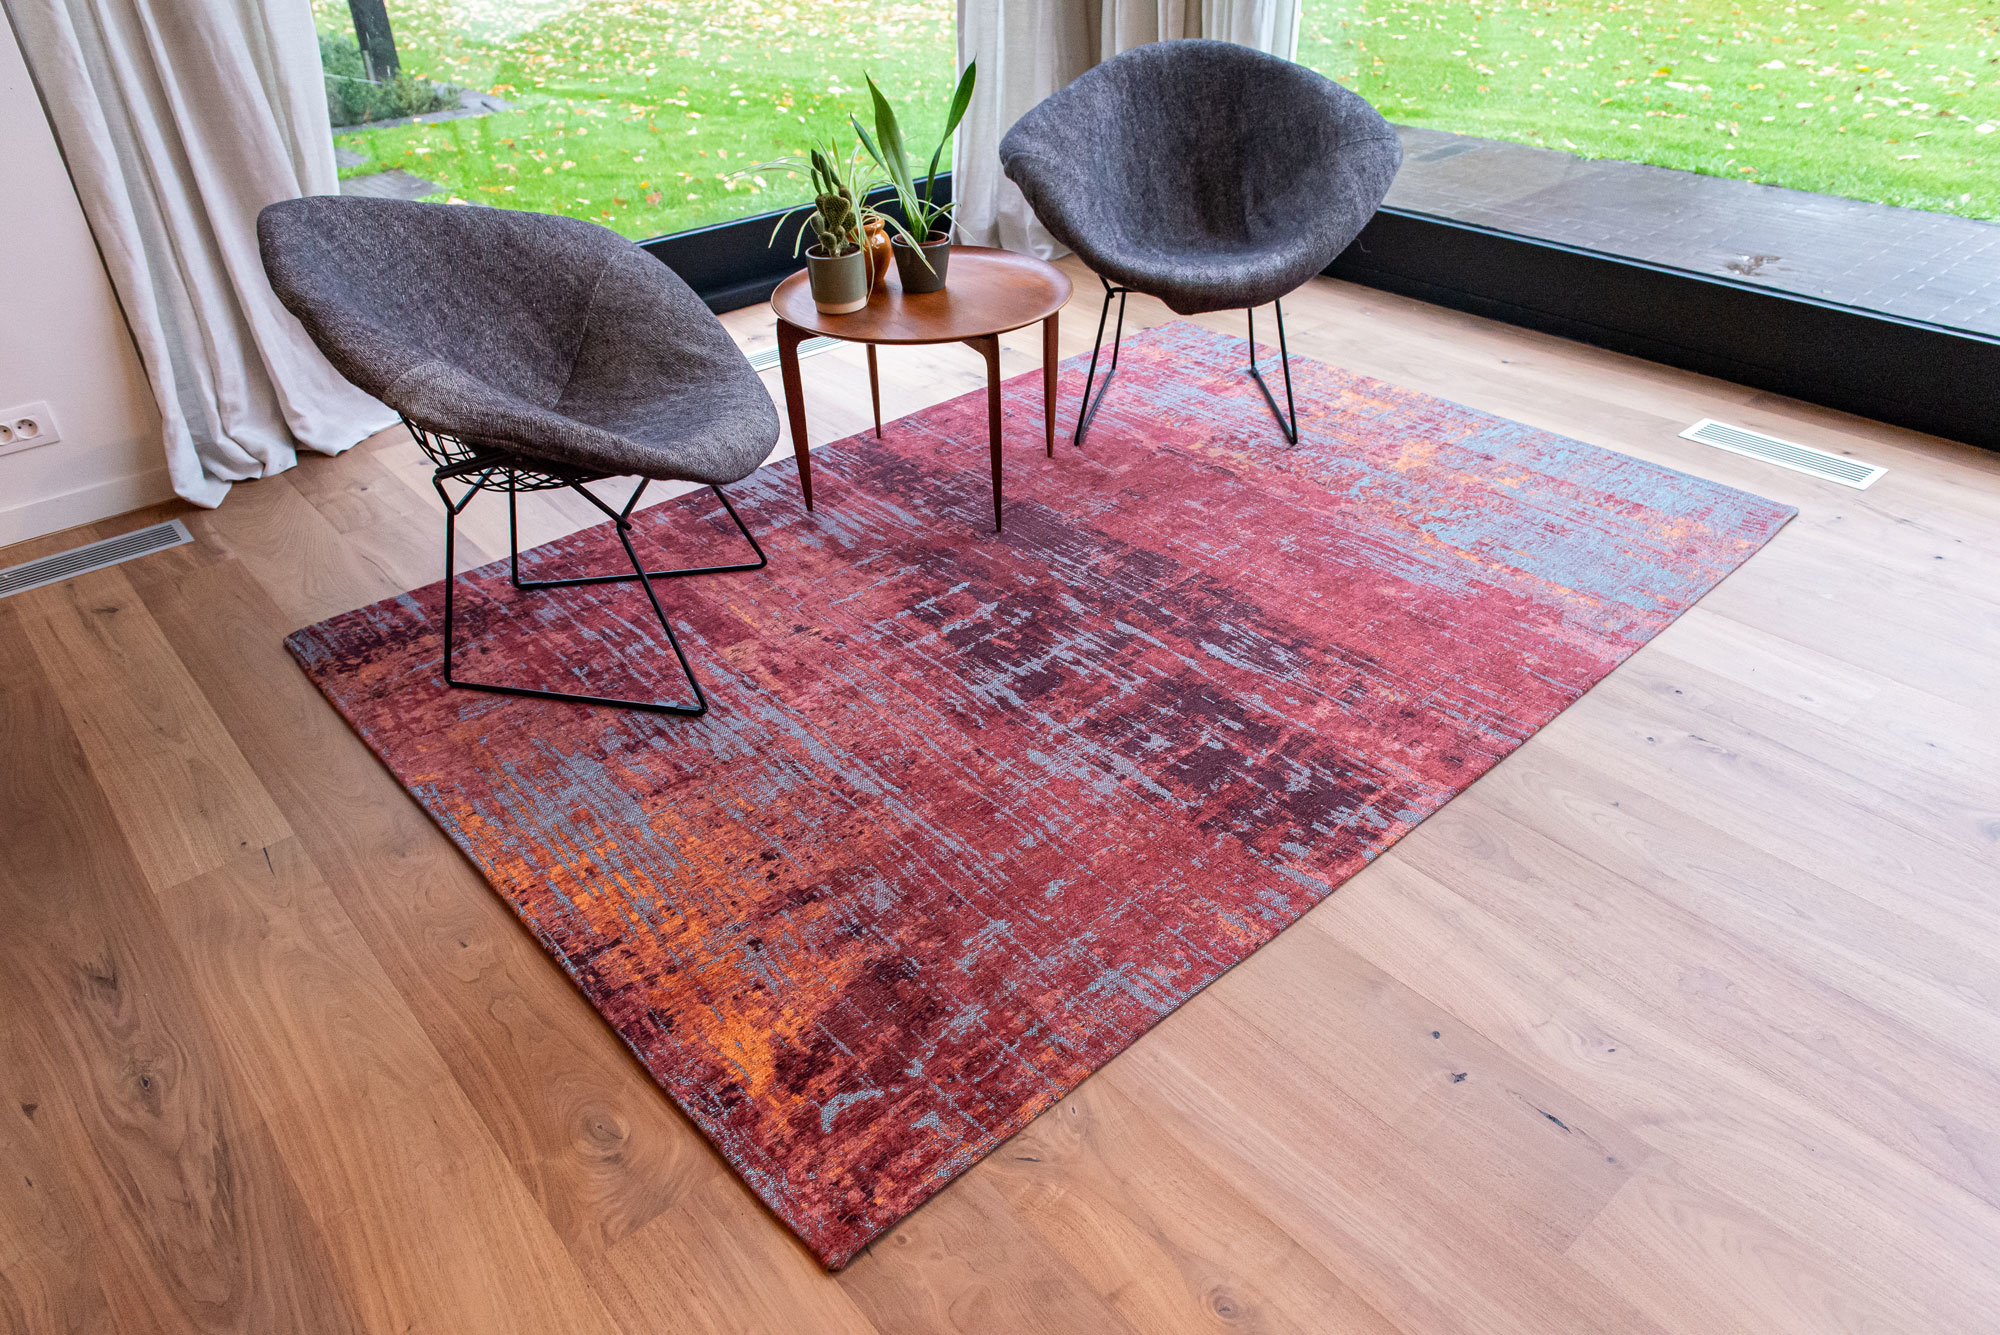 Abstract Flatwoven Red Rug ☞ Size: 5' 7" x 8' (170 x 240 cm)